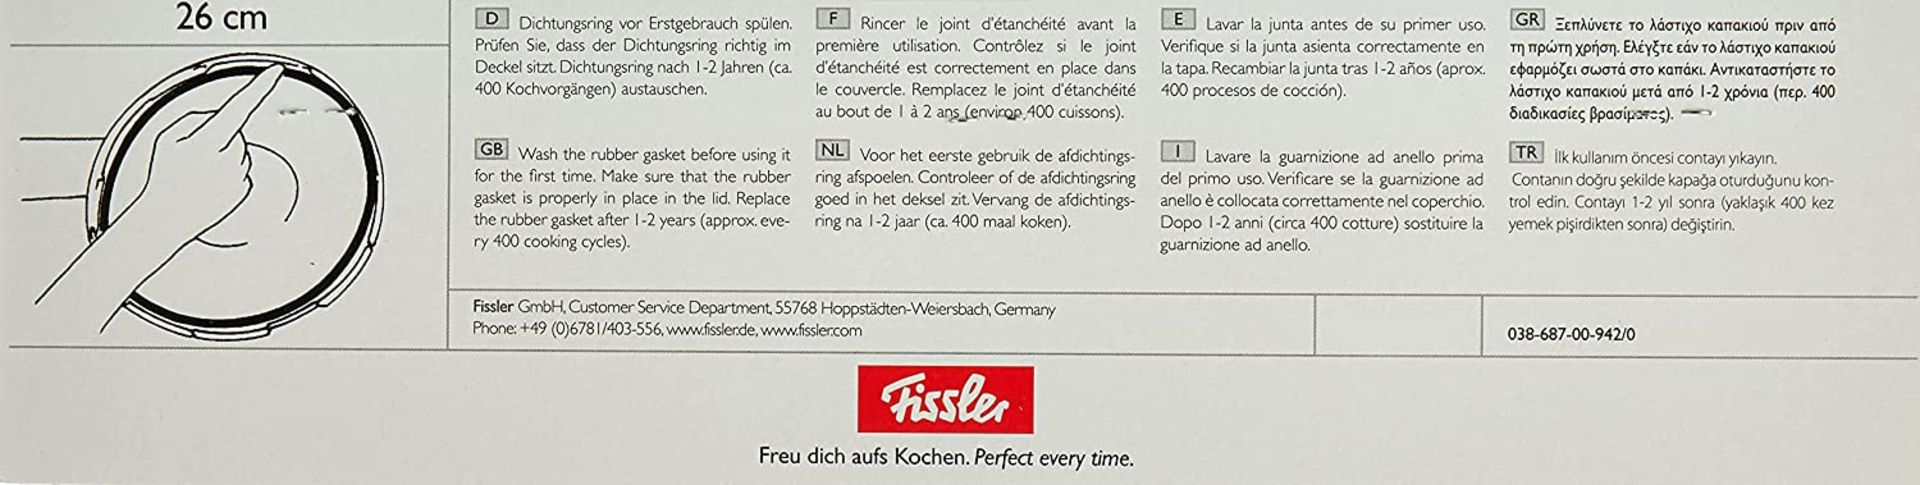 2 x Genuine FISSLER 26cm Sealing Rings for Pressure Cooker - £1 Start, No Reserve - RRP £65.98 - Image 4 of 6